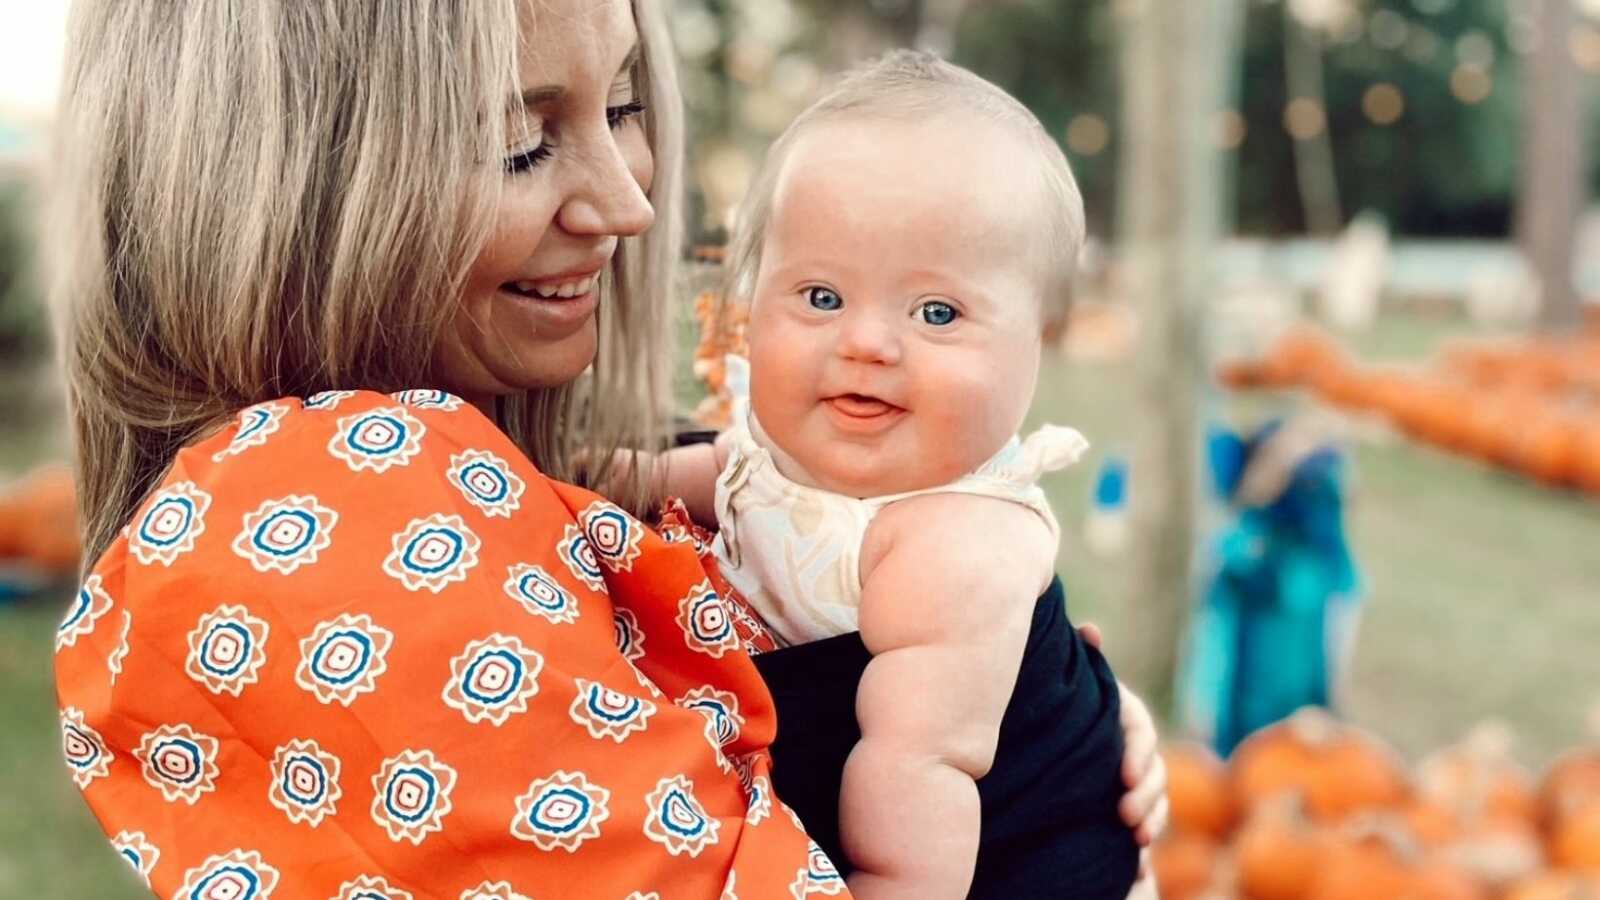 mama in a red dress holding her baby girl while standing in a pumpkin patch